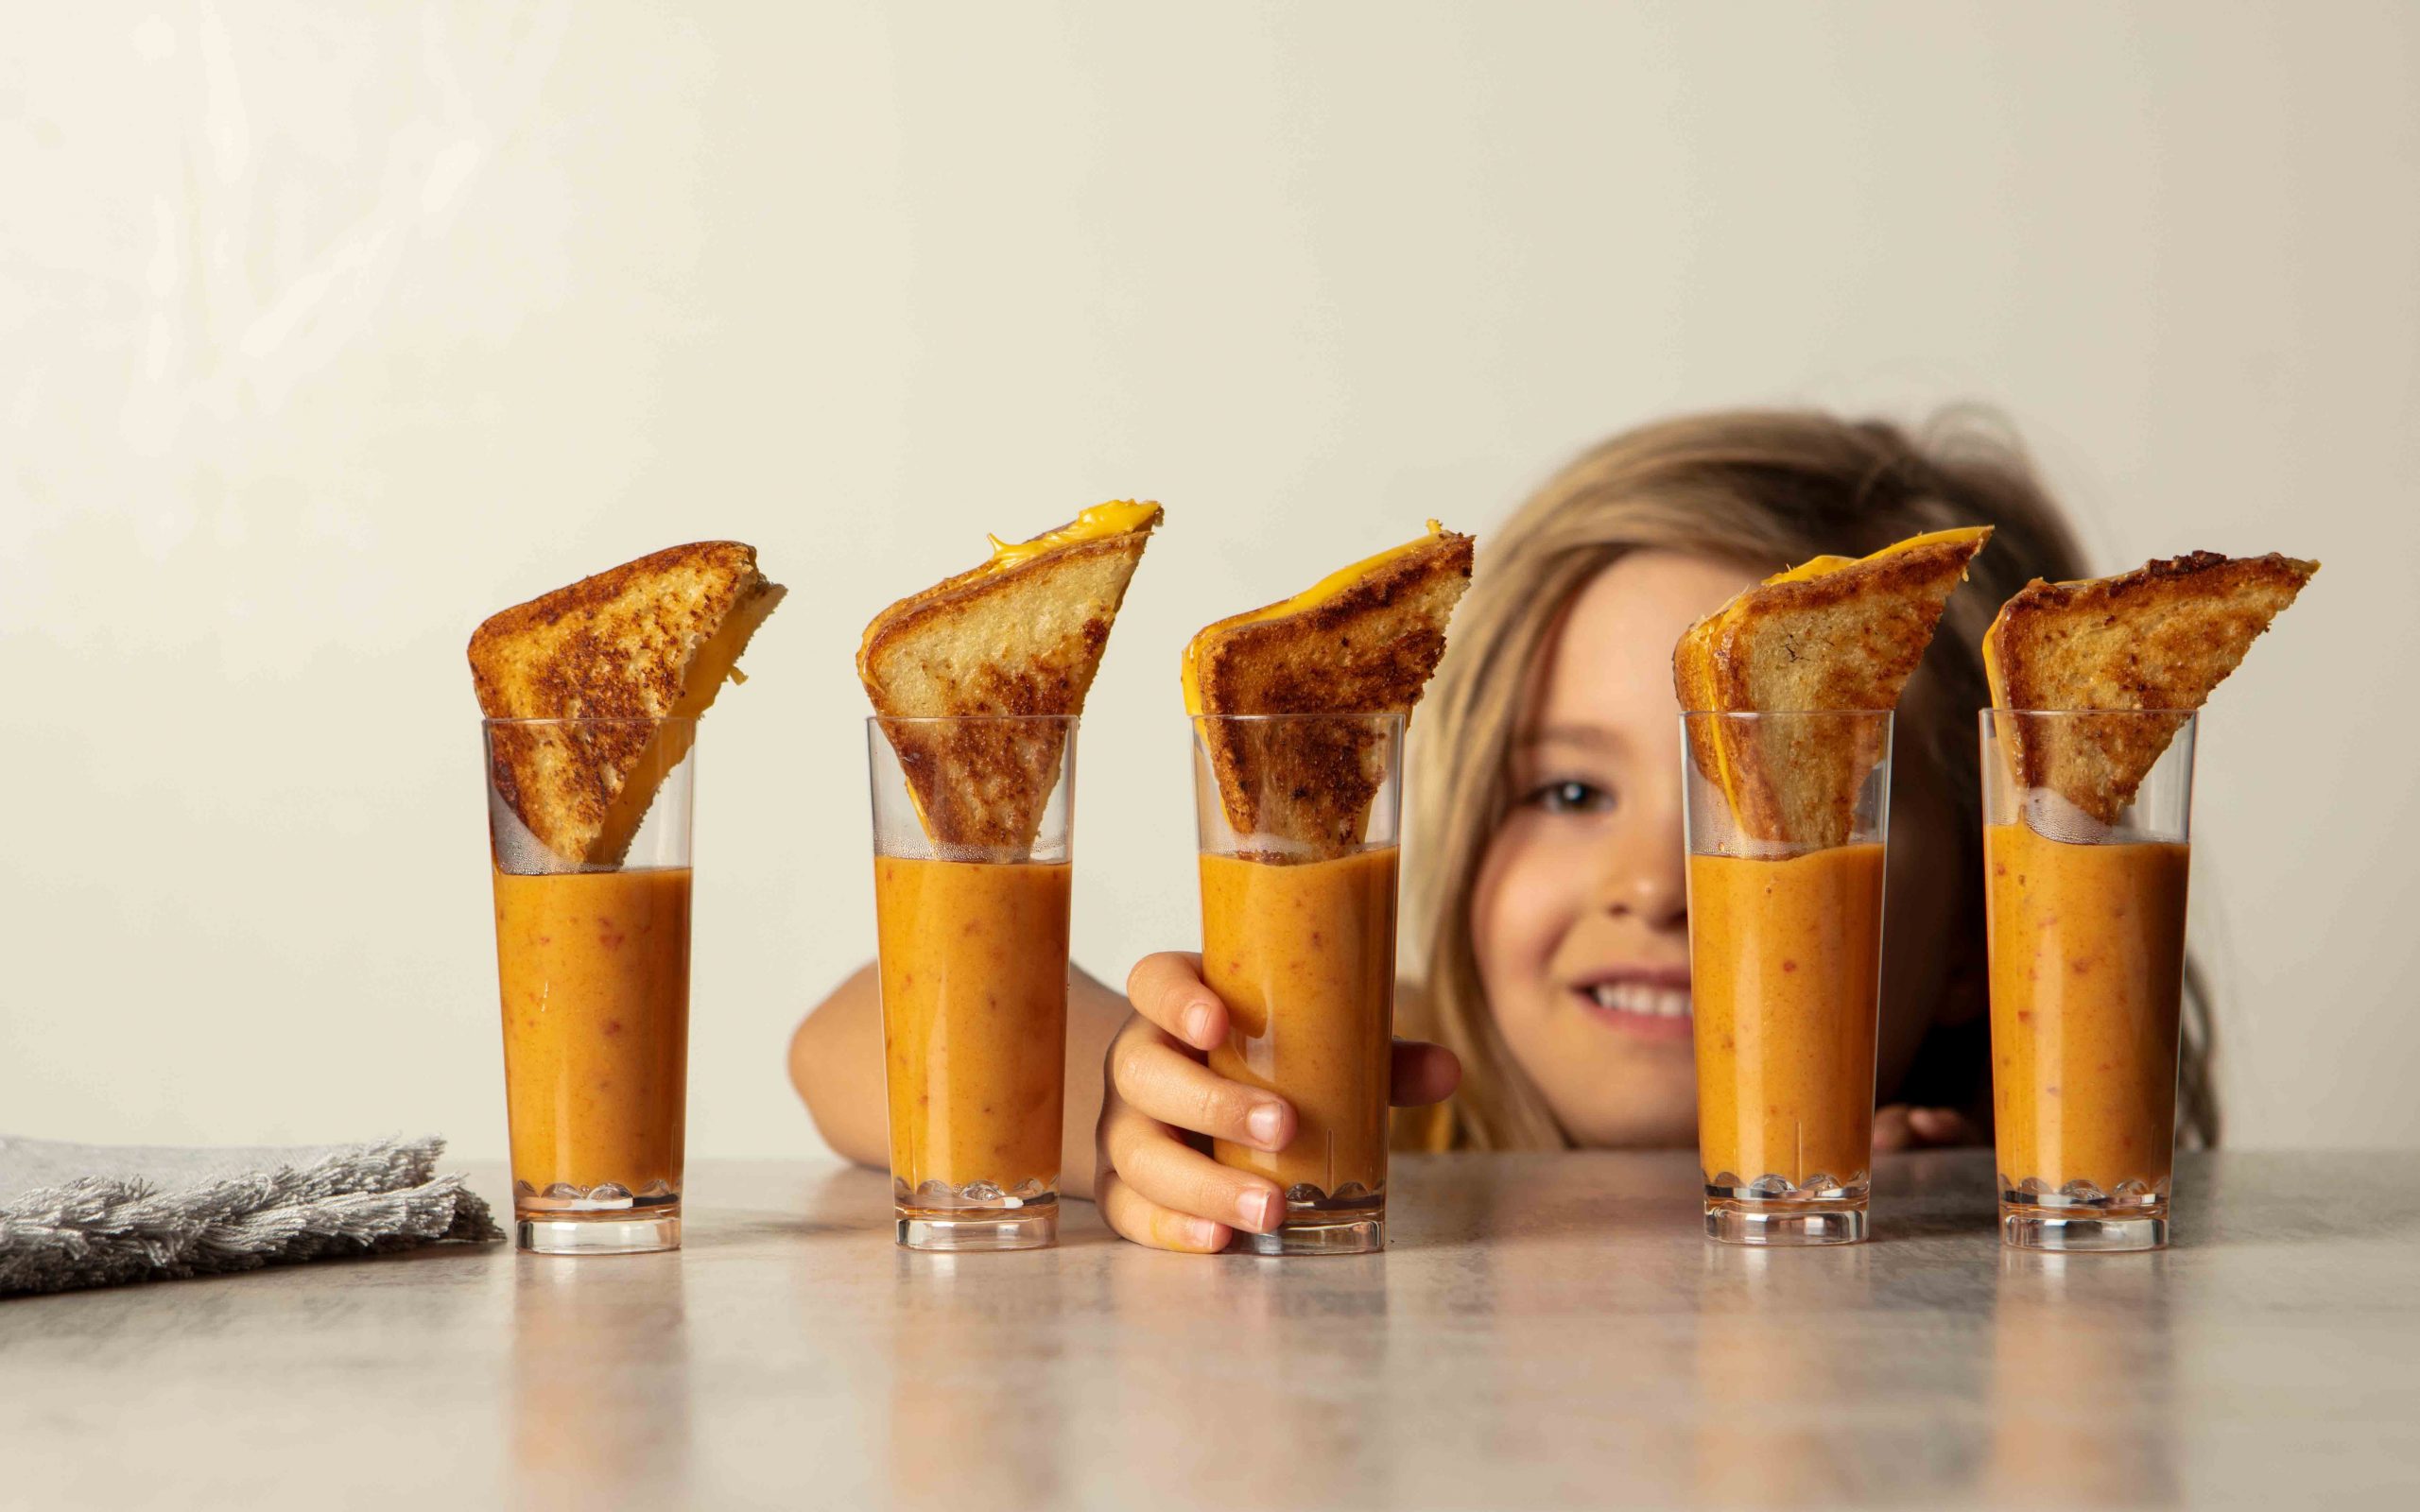 Grilled cheese and tomato soup shooters